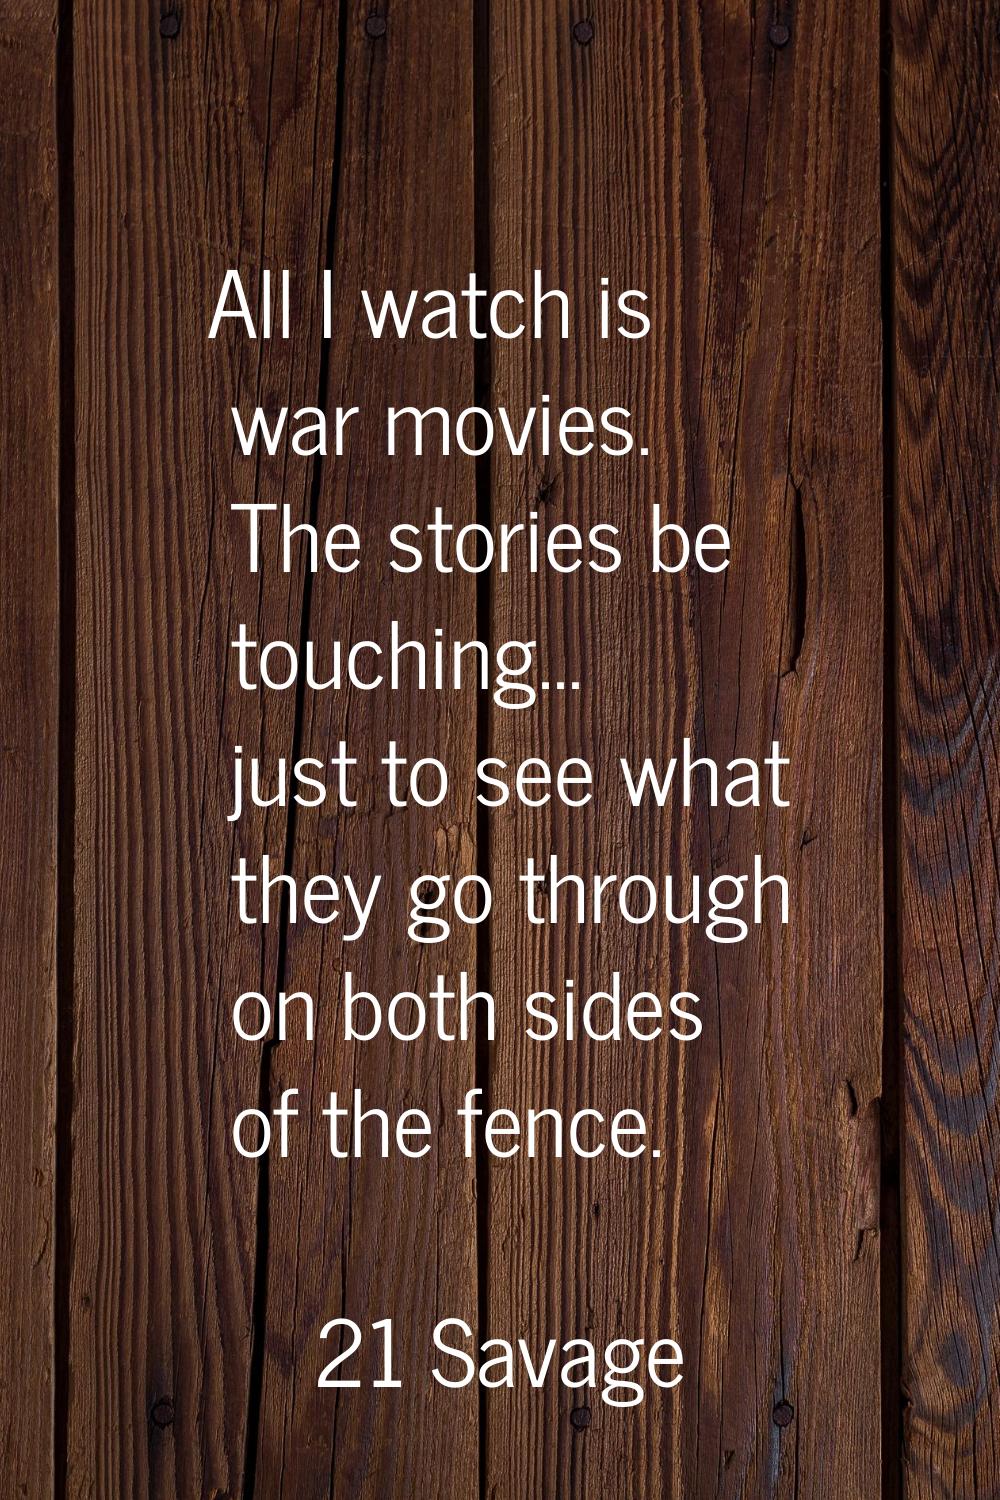 All I watch is war movies. The stories be touching... just to see what they go through on both side